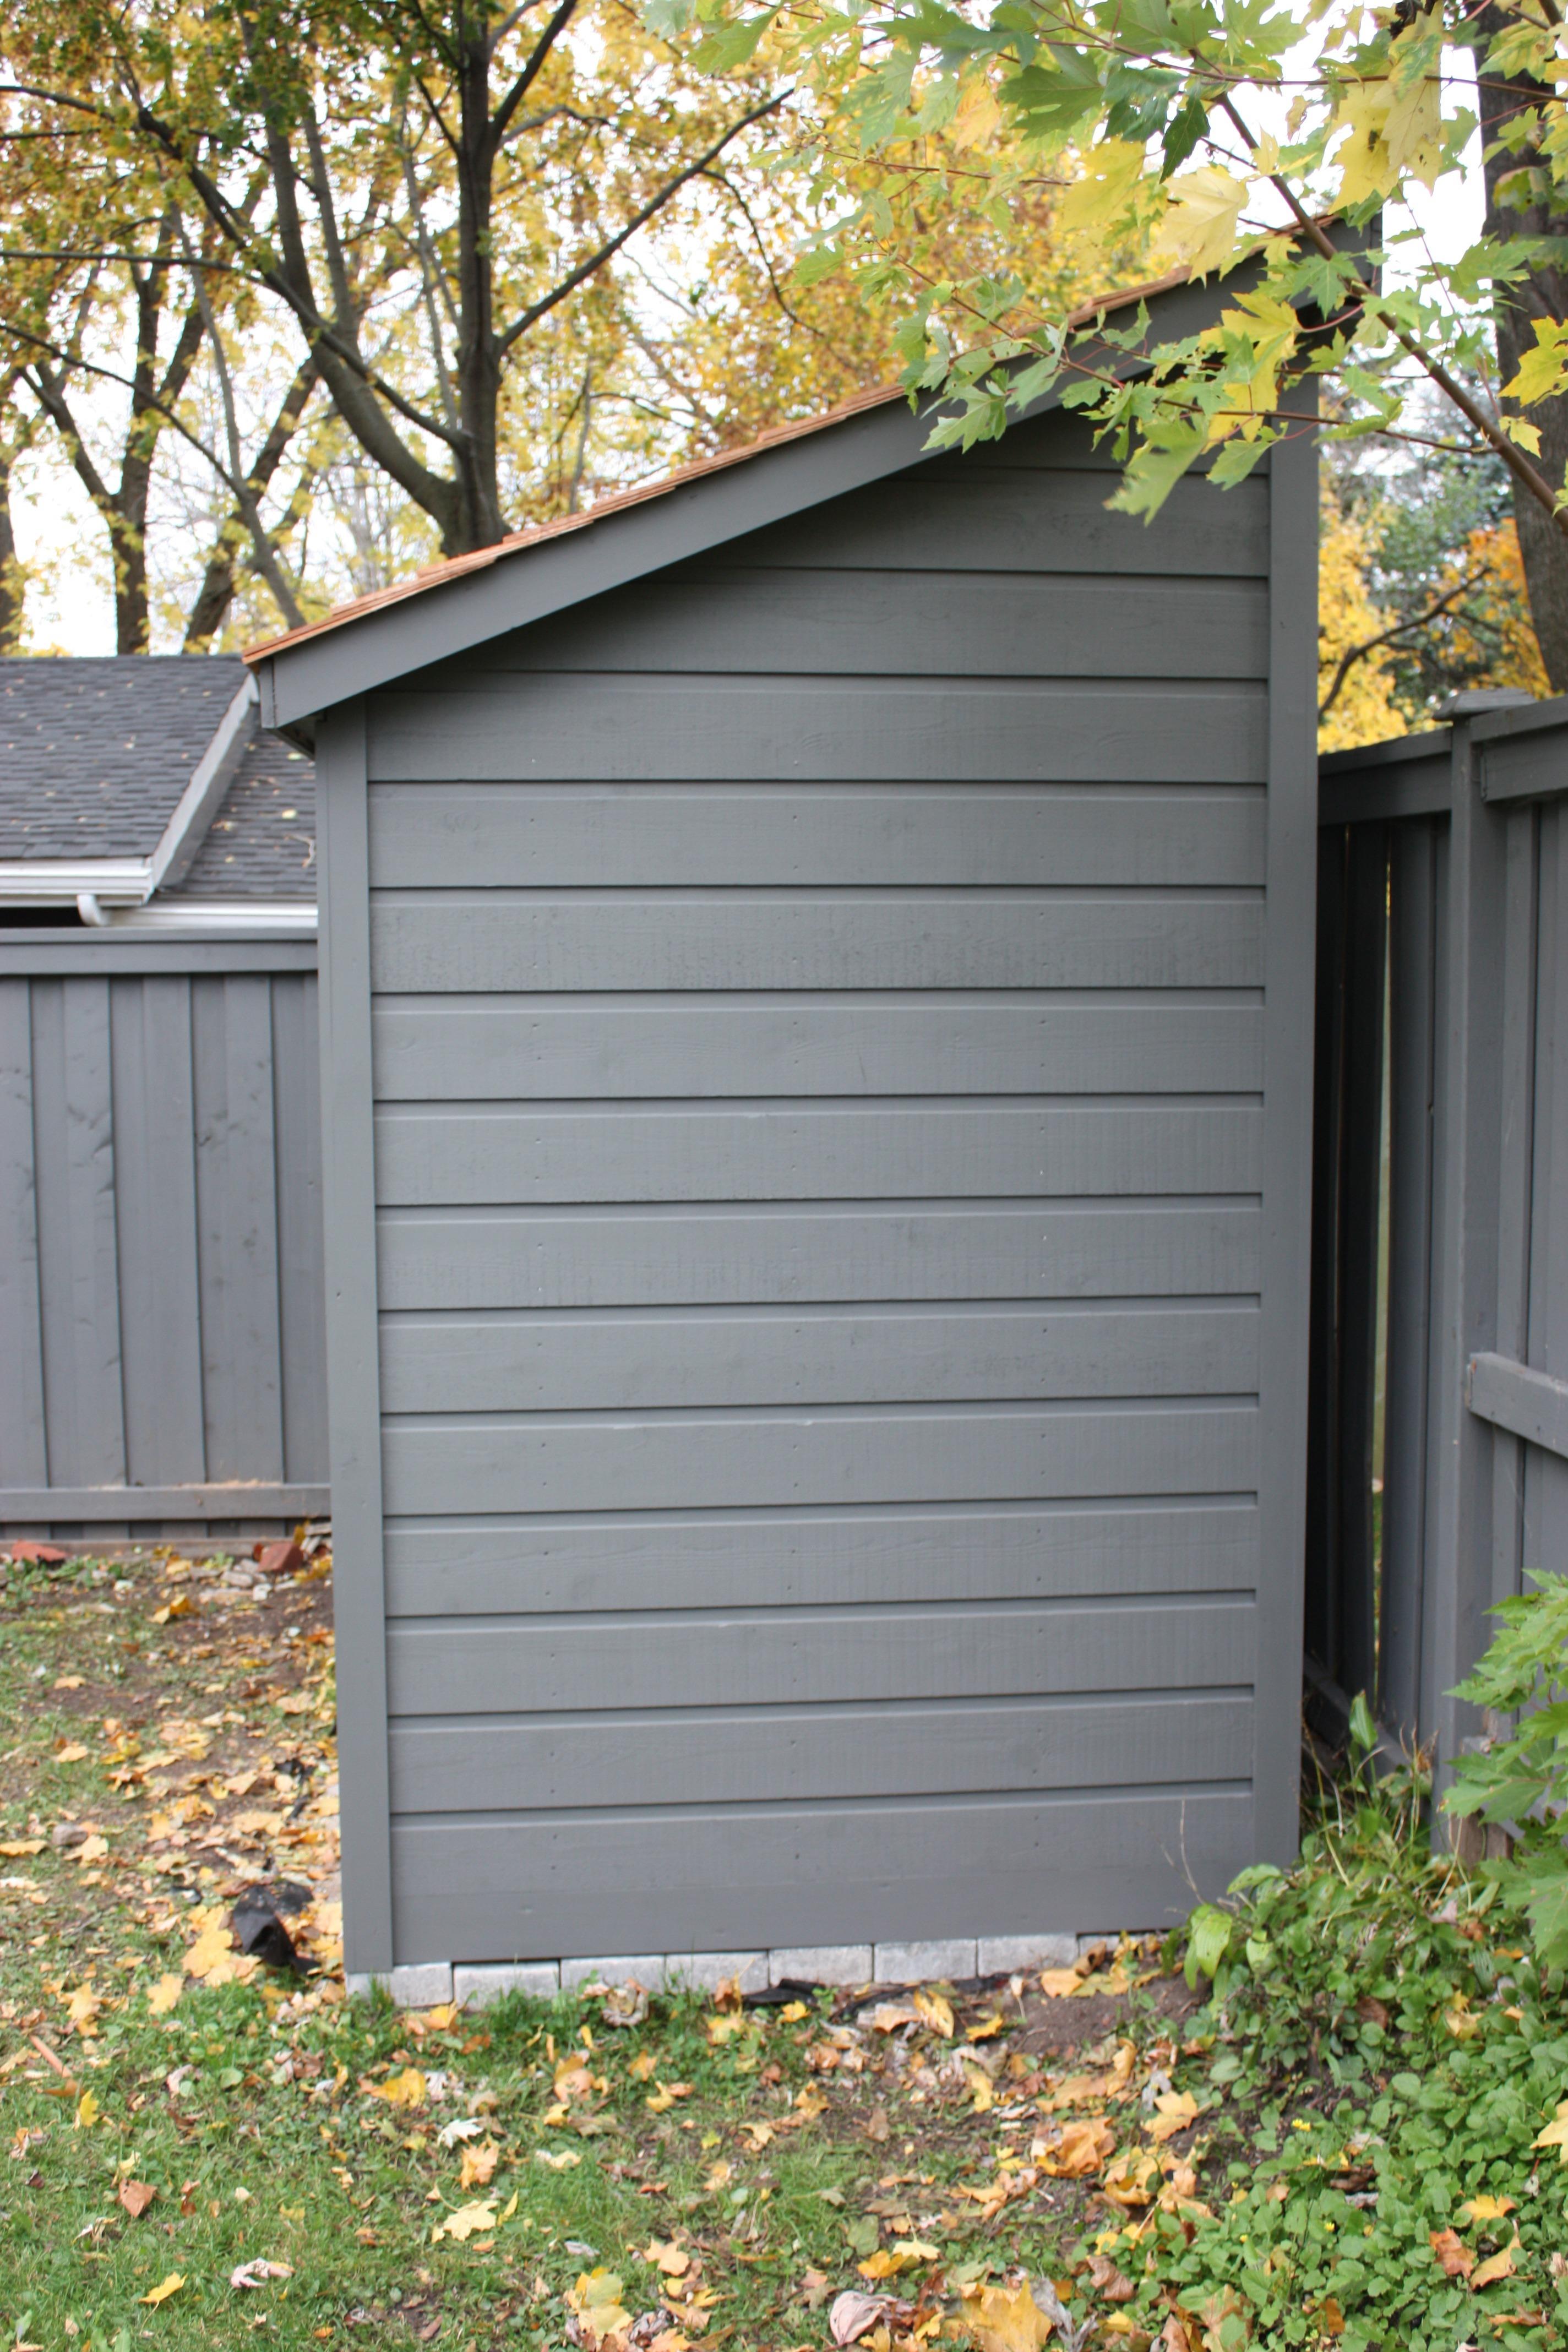 Cedar Sarawak shed 5x10 with concealed double doors in Toronto, Ontario. ID number 182416-2